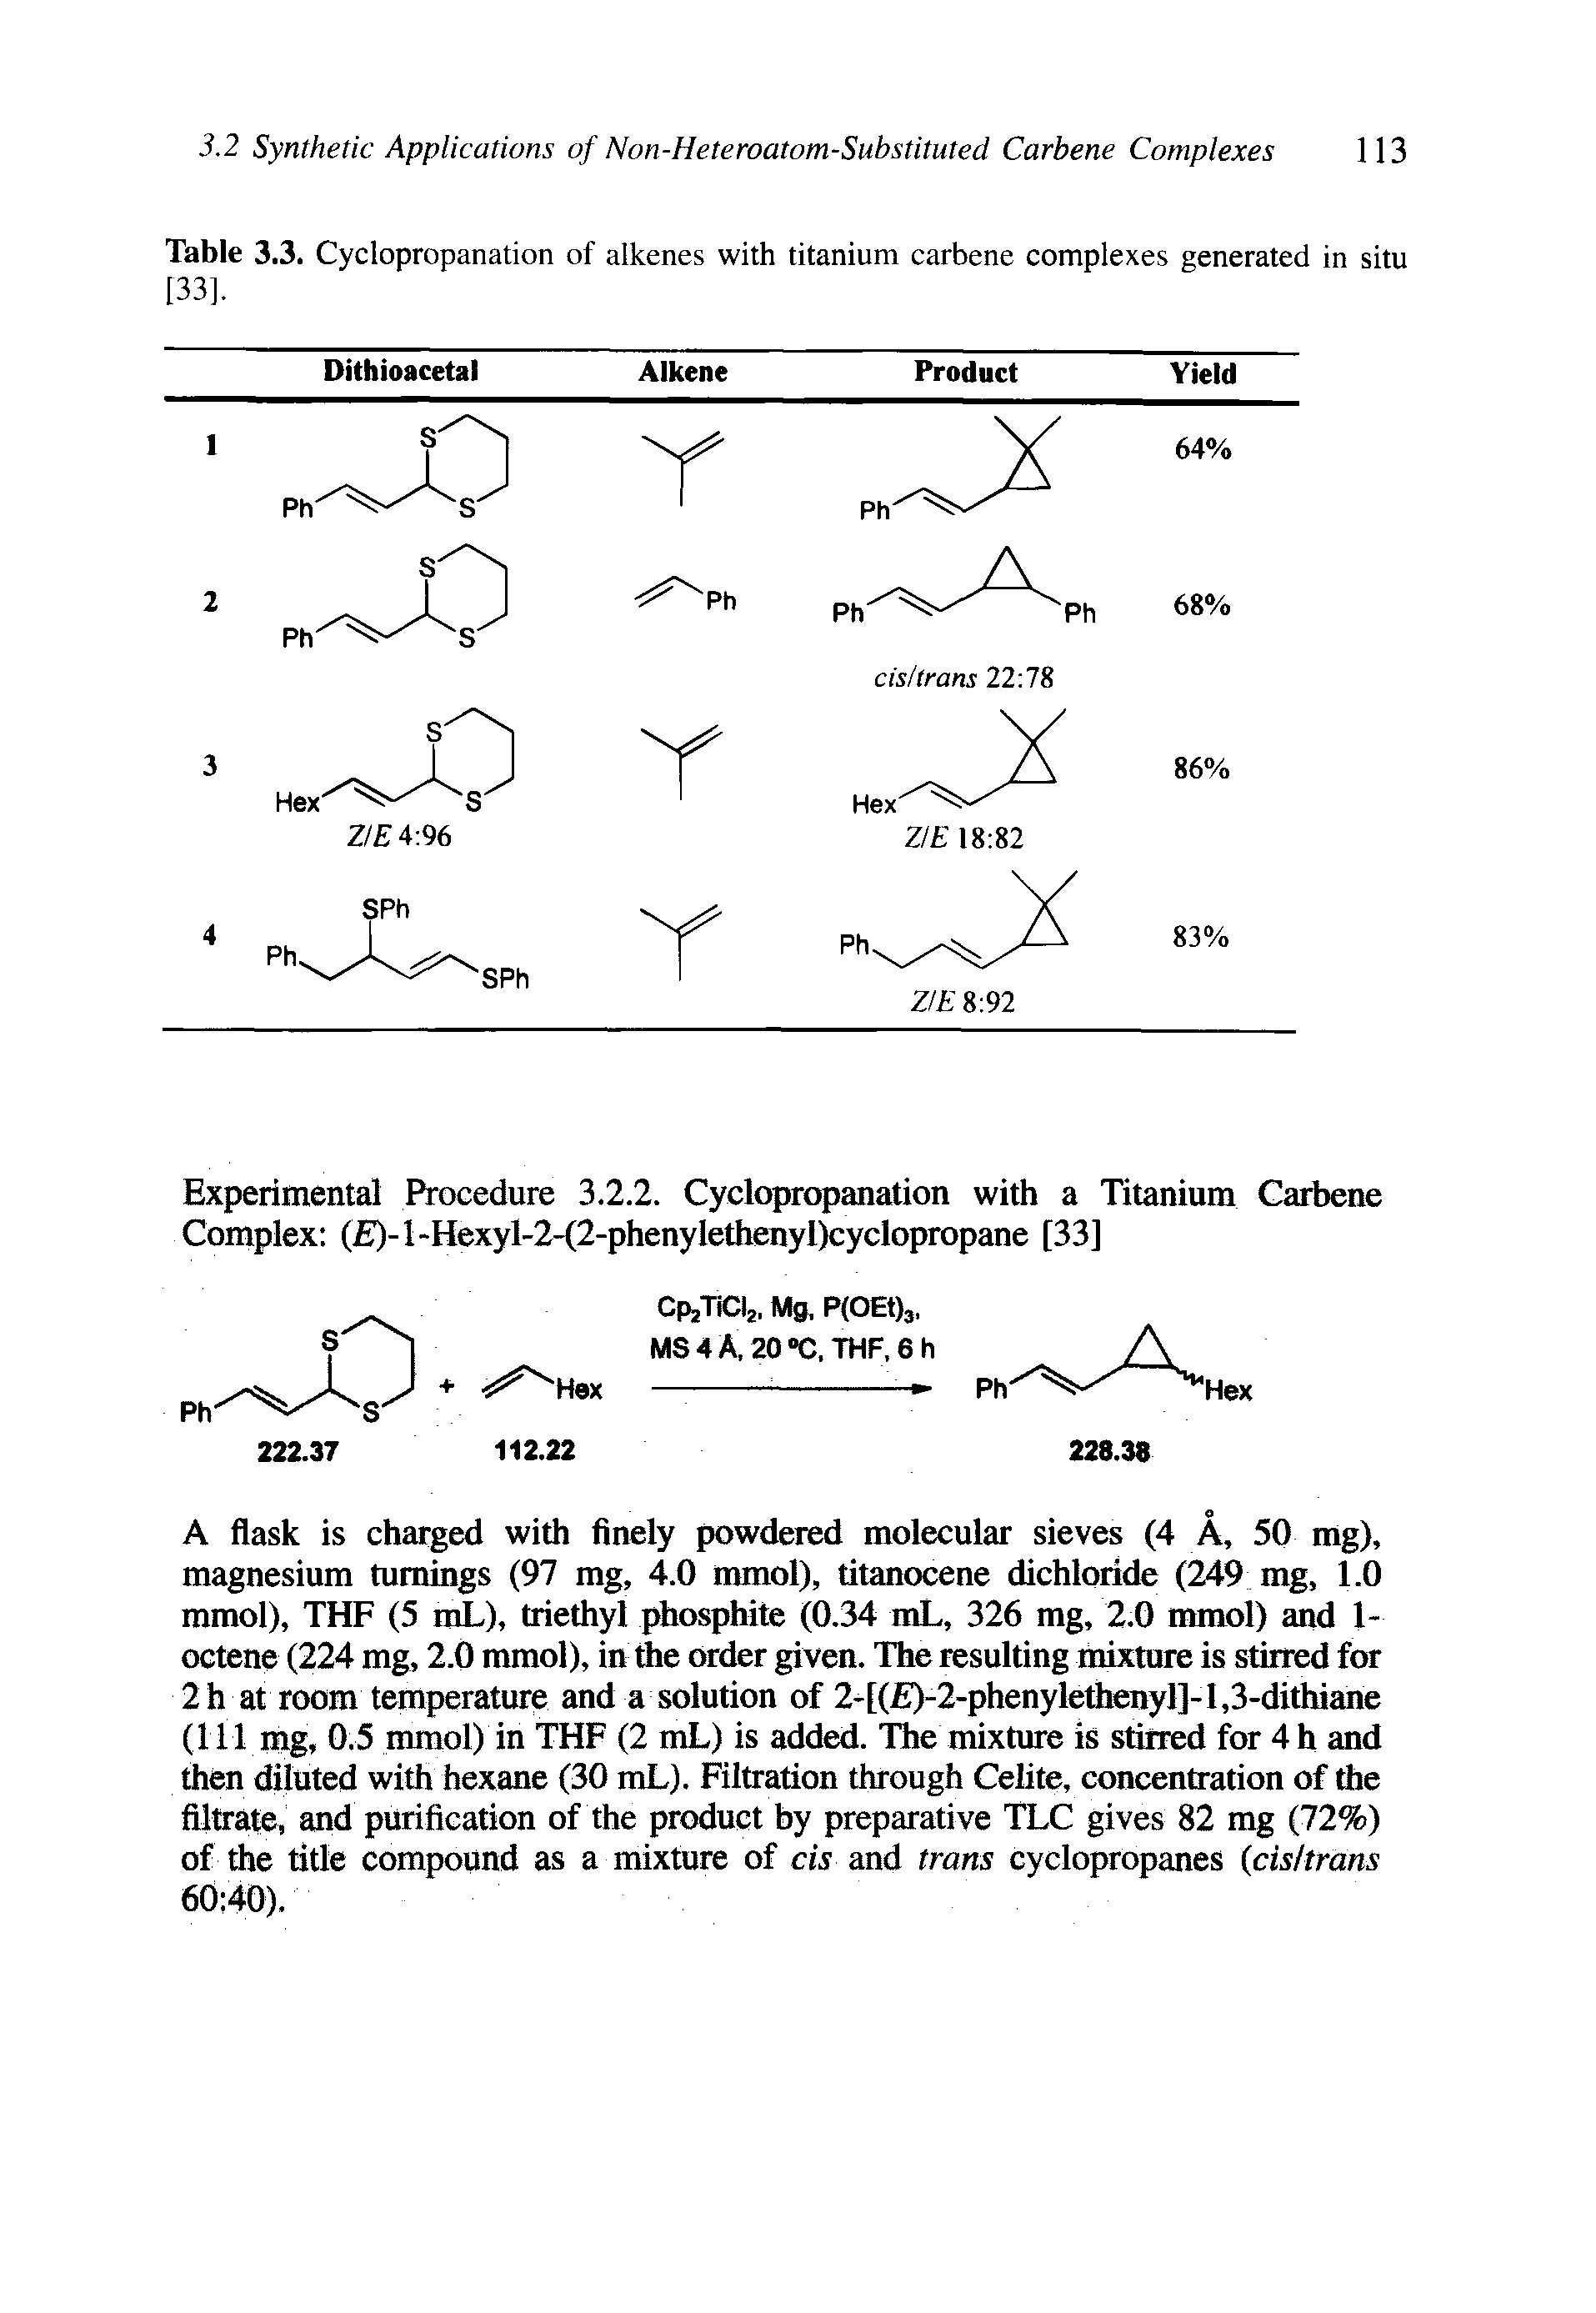 Table 3.3. Cyclopropanation of alkenes with titanium carbene complexes generated in situ [33],...